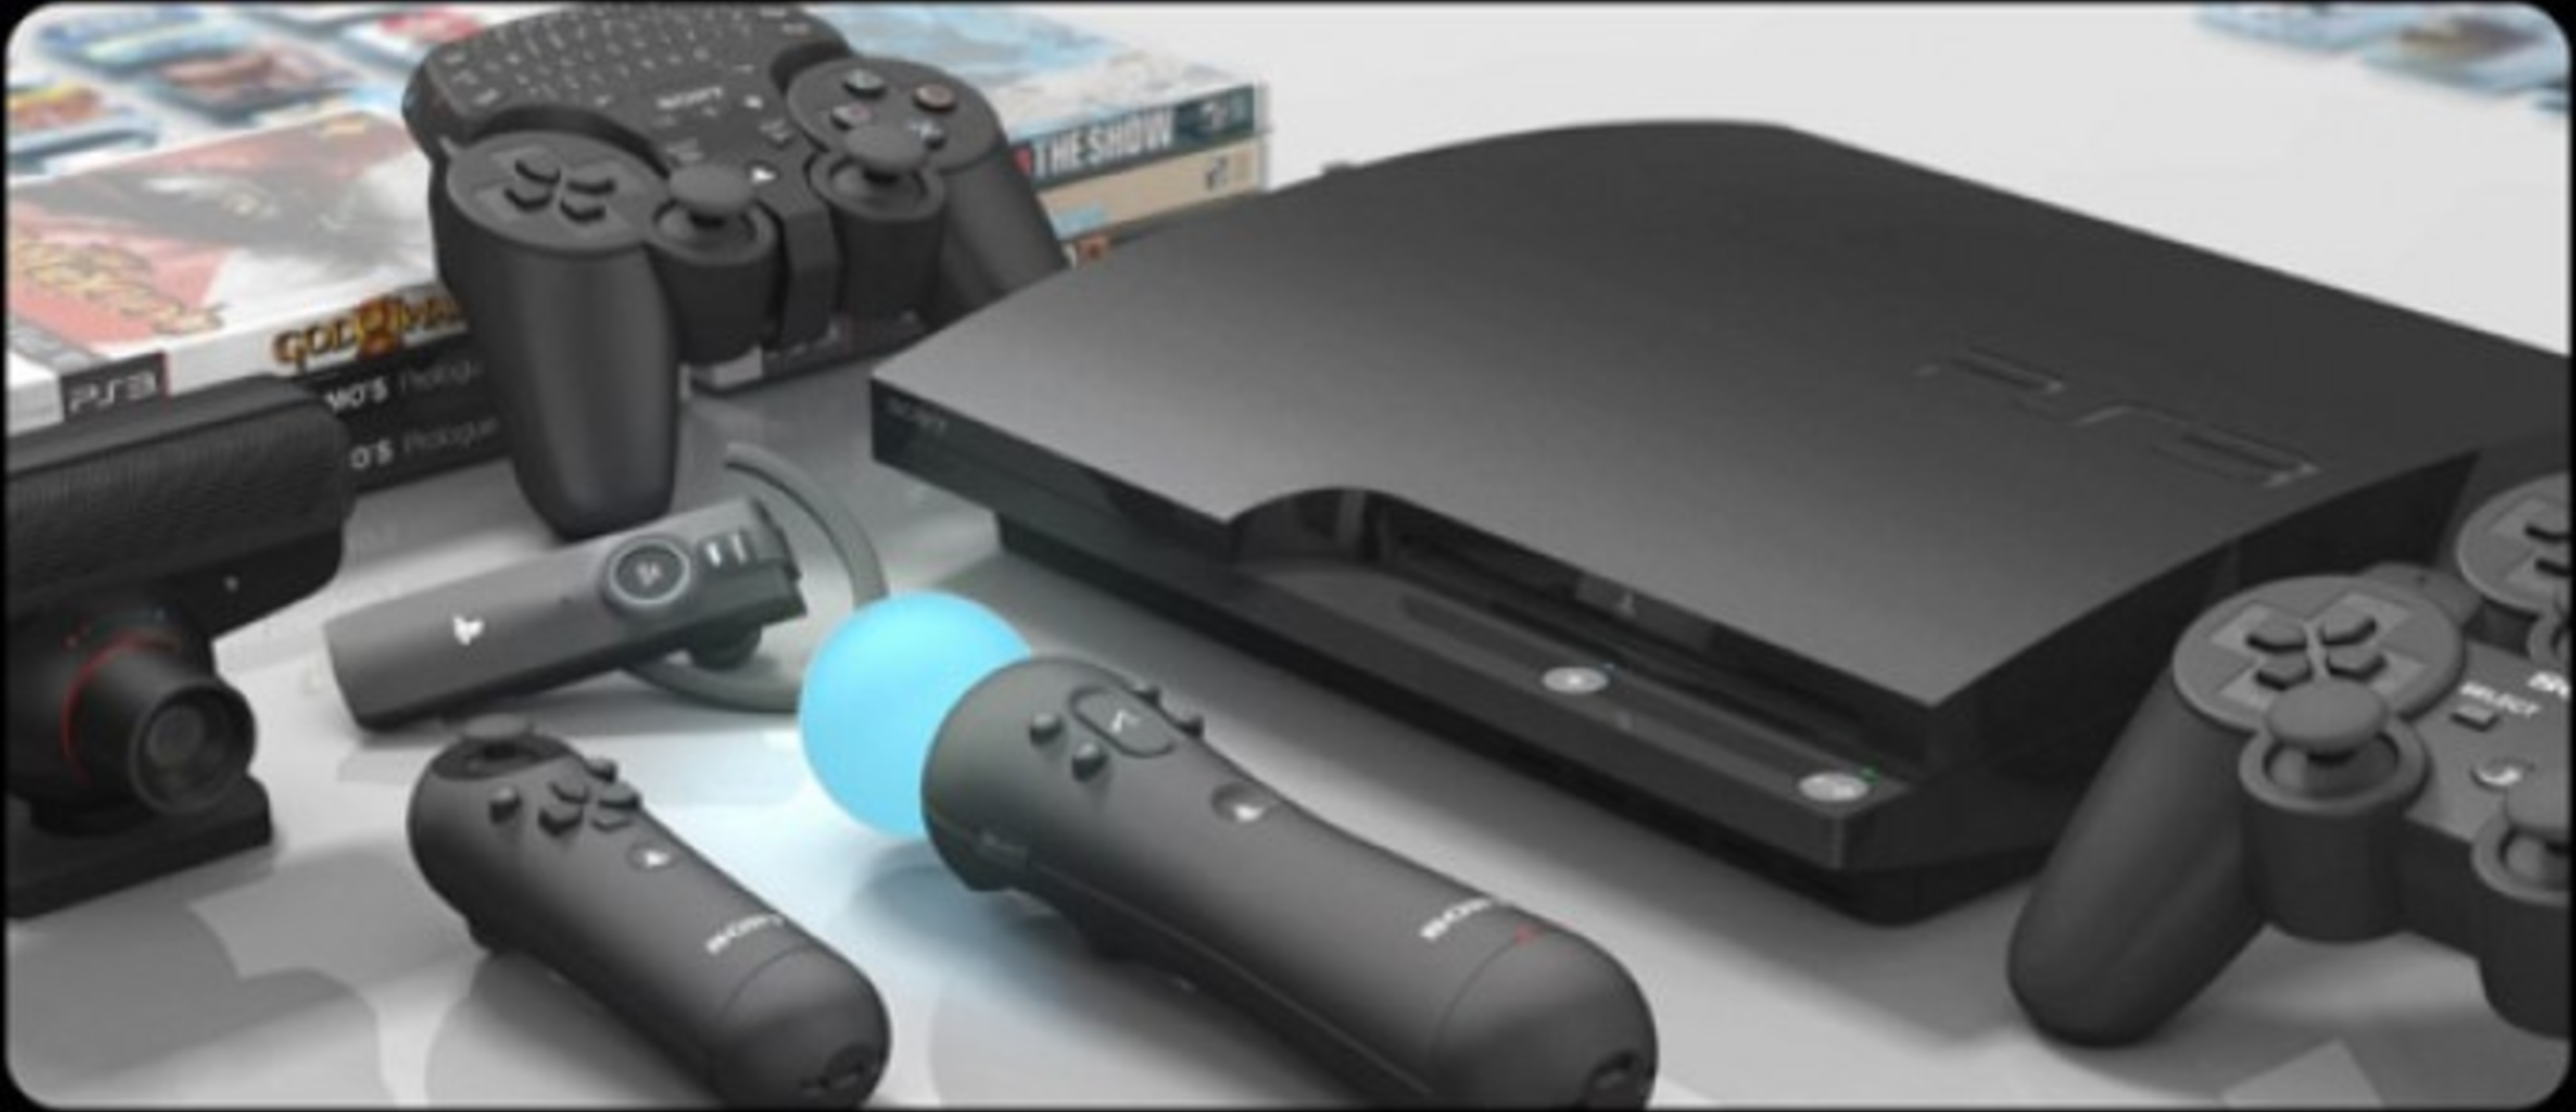 Sony playstation ремонтundefined. PLAYSTATION move ps5 Sony. ПС мув для пс4. Сони ps3 инсайдеры. PS move ps3 ps4.